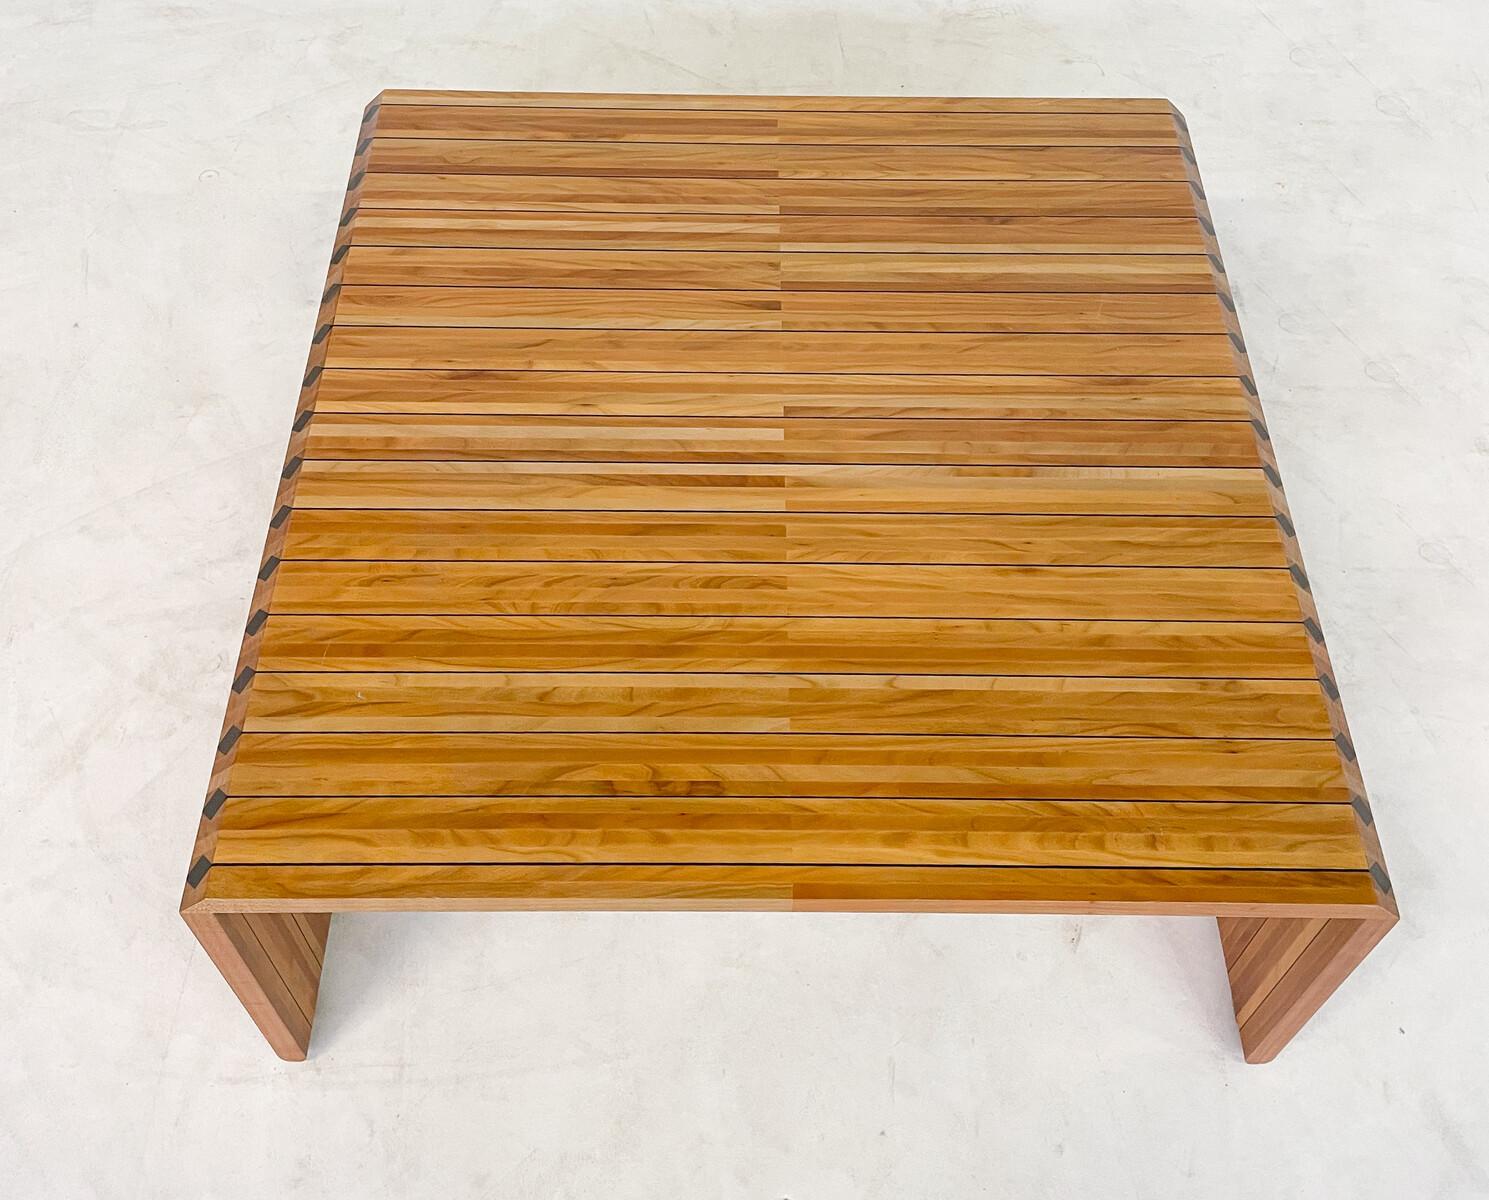 Late 20th Century Mid-Century Modern Italian Wooden Coffee Table, 1970s For Sale